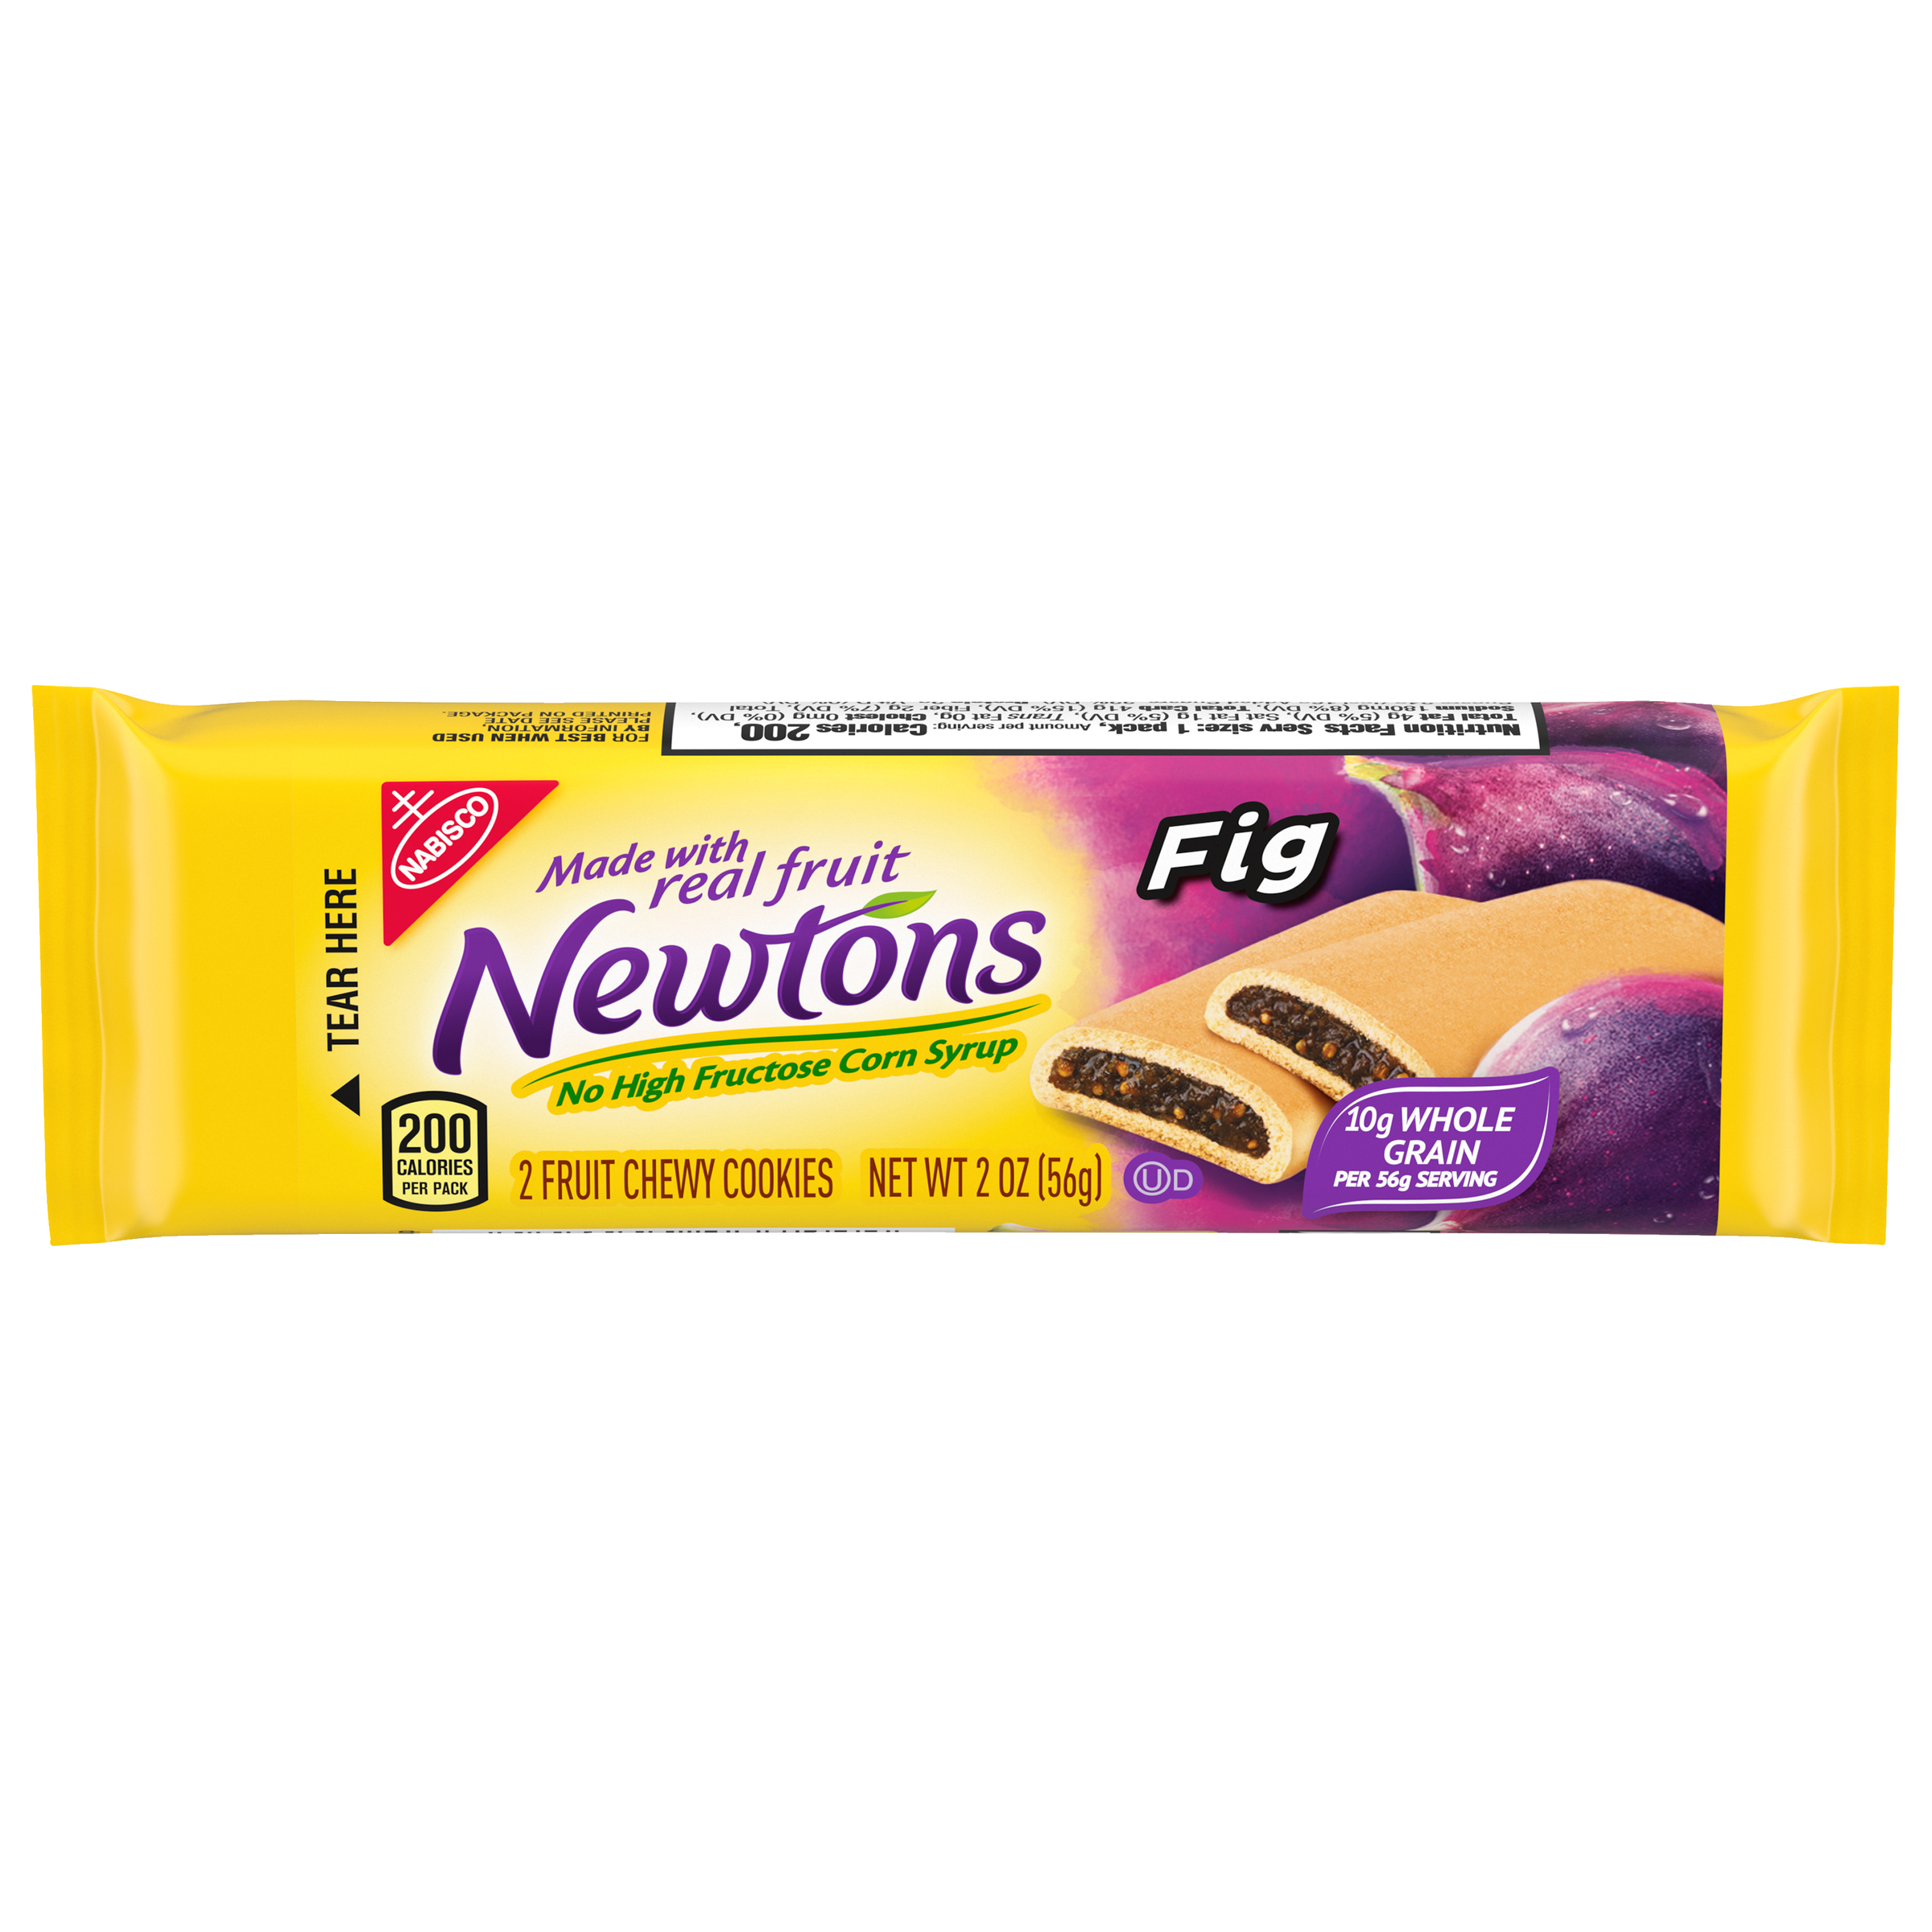 Newtons Soft & Fruit Chewy Fig Cookies, 2 oz Snack Pack (2 Cookies Per Pack)